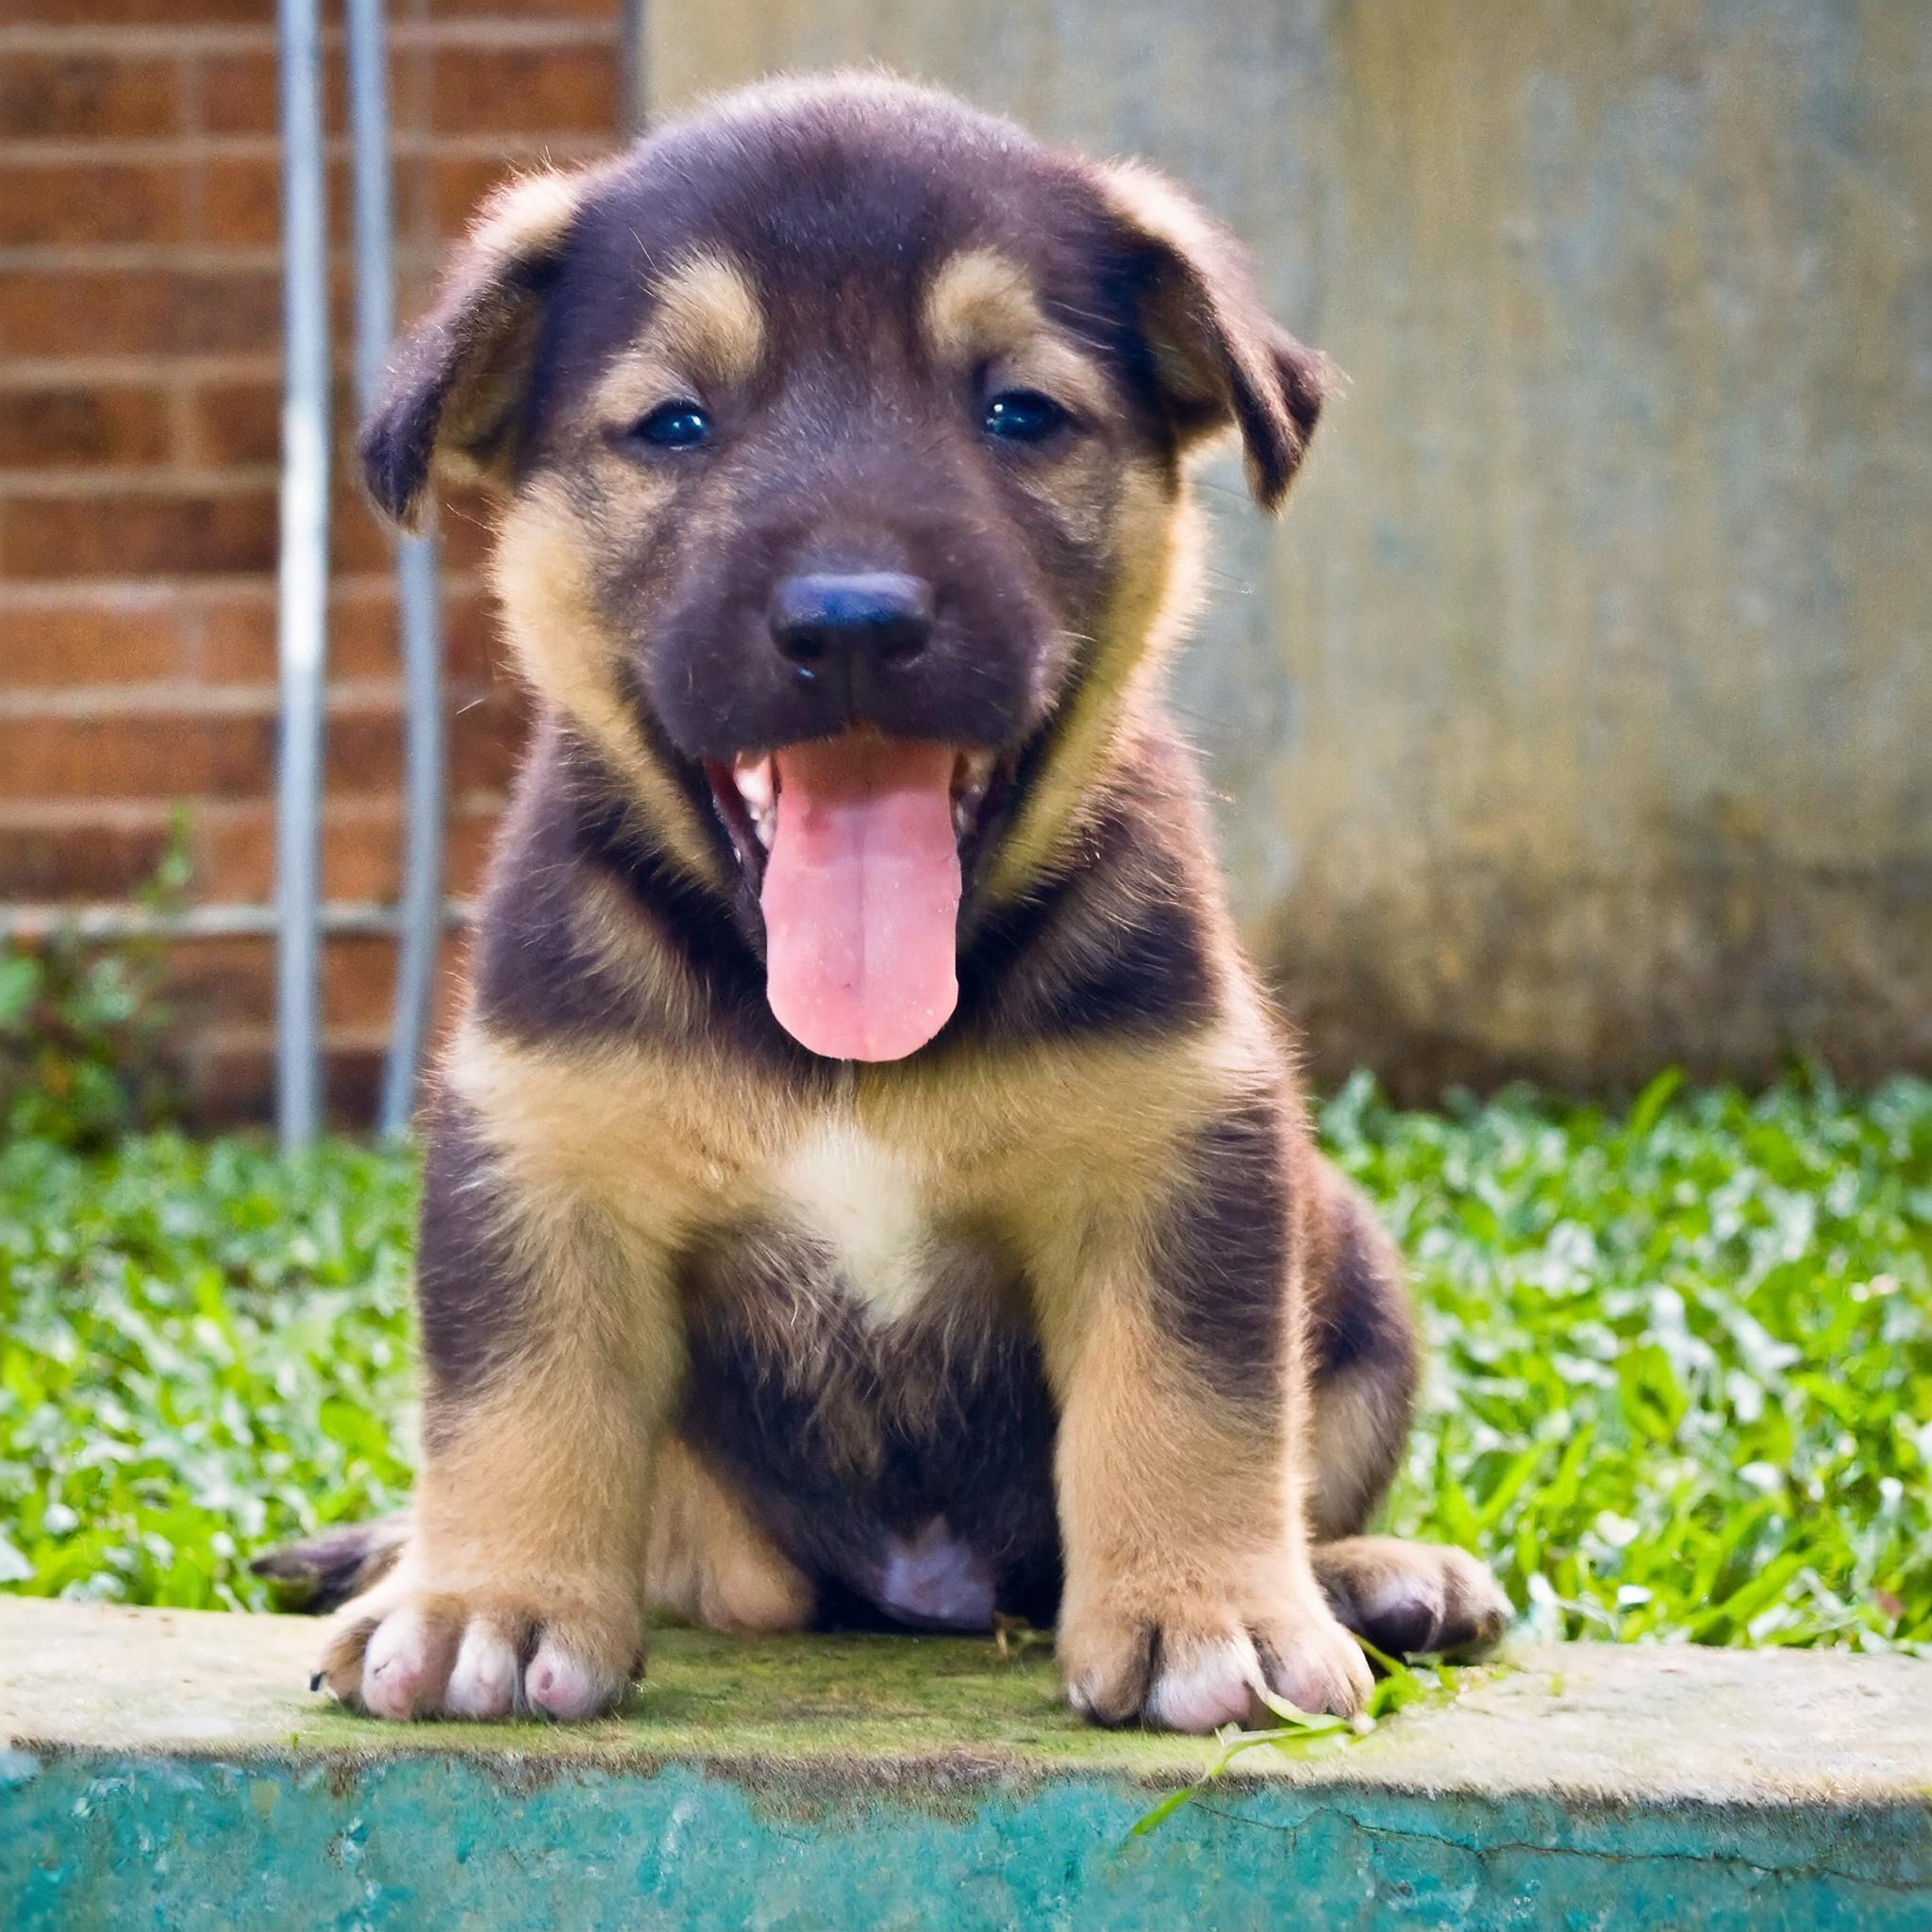 Training your puppy to reduce whining isn't always the goal. As pet parents, we want our dogs to express themselves. 